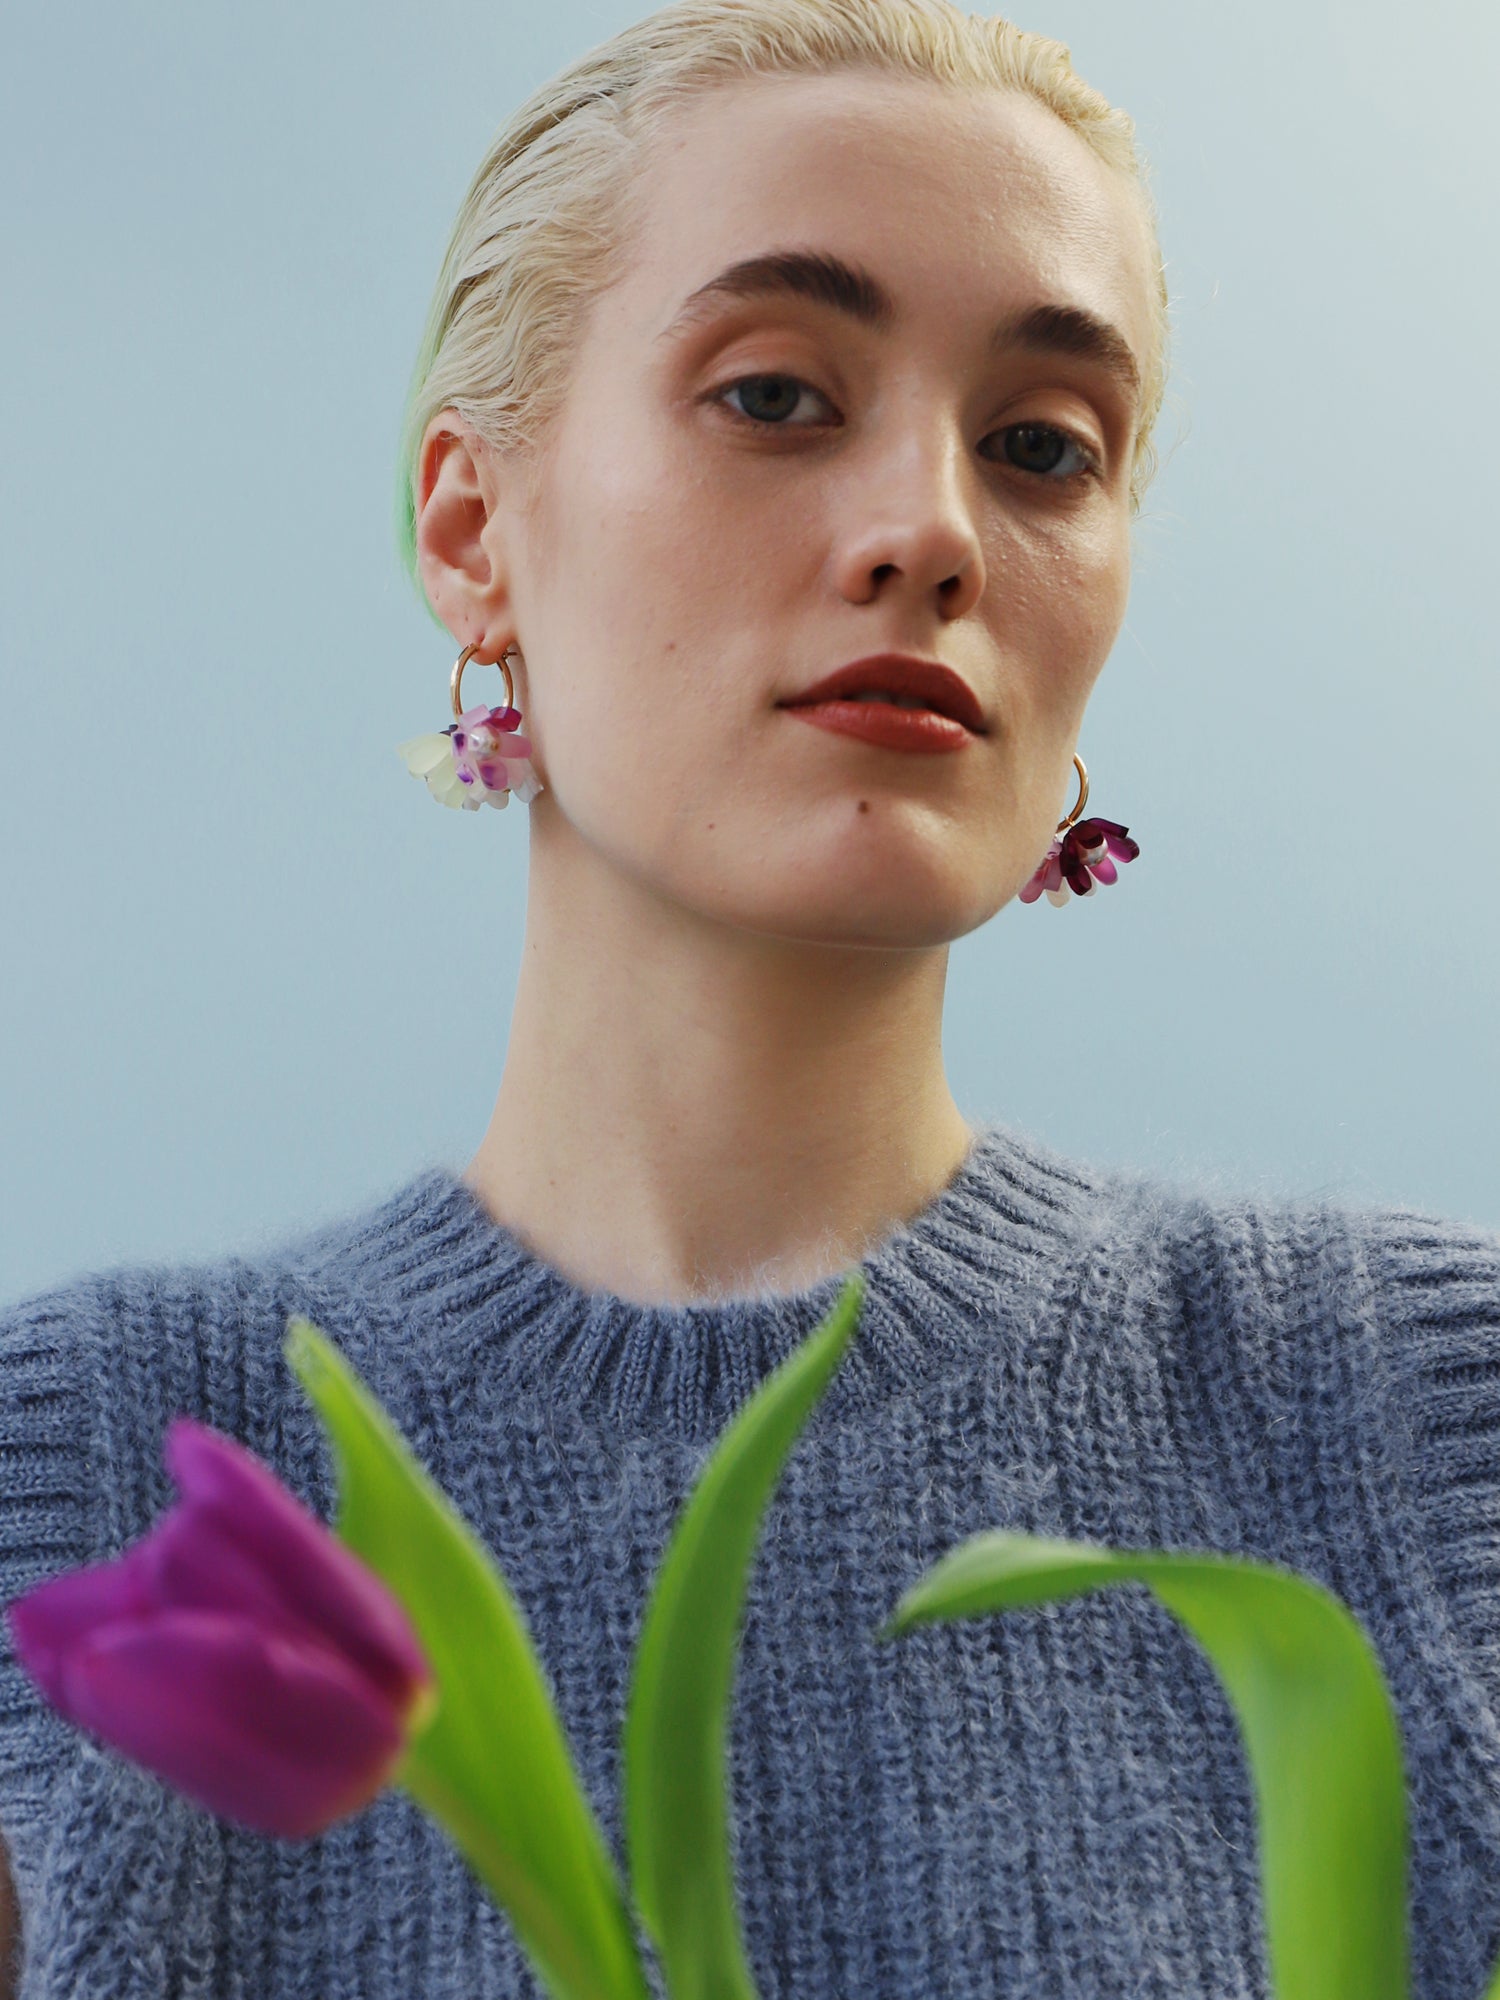 Statement tulip meadow hoop earrings with 8 interchangeable flowers in cream, white and purple shades. Made from heat-formed acrylic with high quality glass pearls and 14k gold-filled findings. Handmade in the UK by Wolf & Moon.